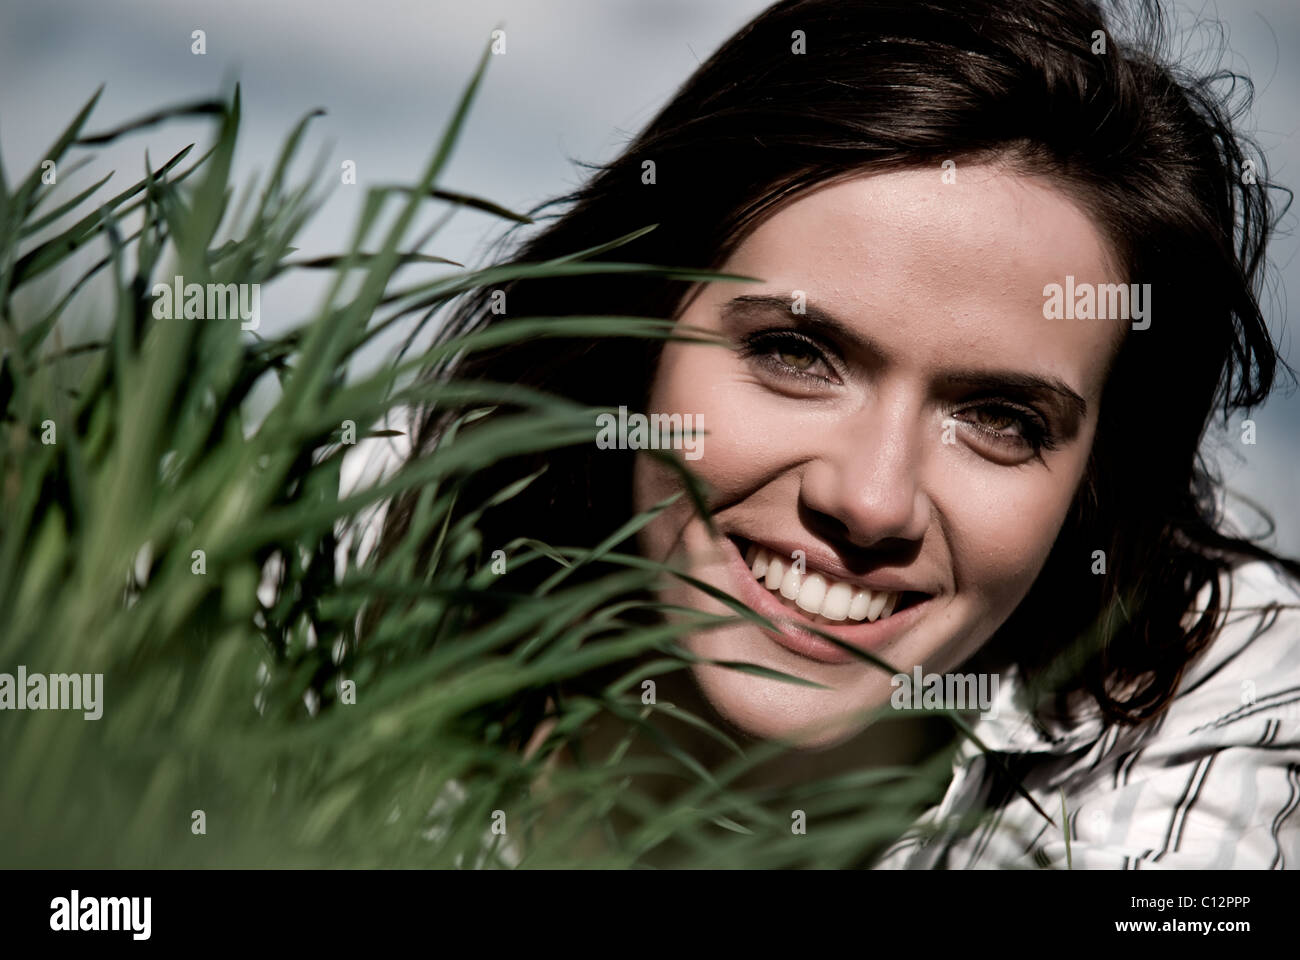 Portait of young woman in grass Stock Photo